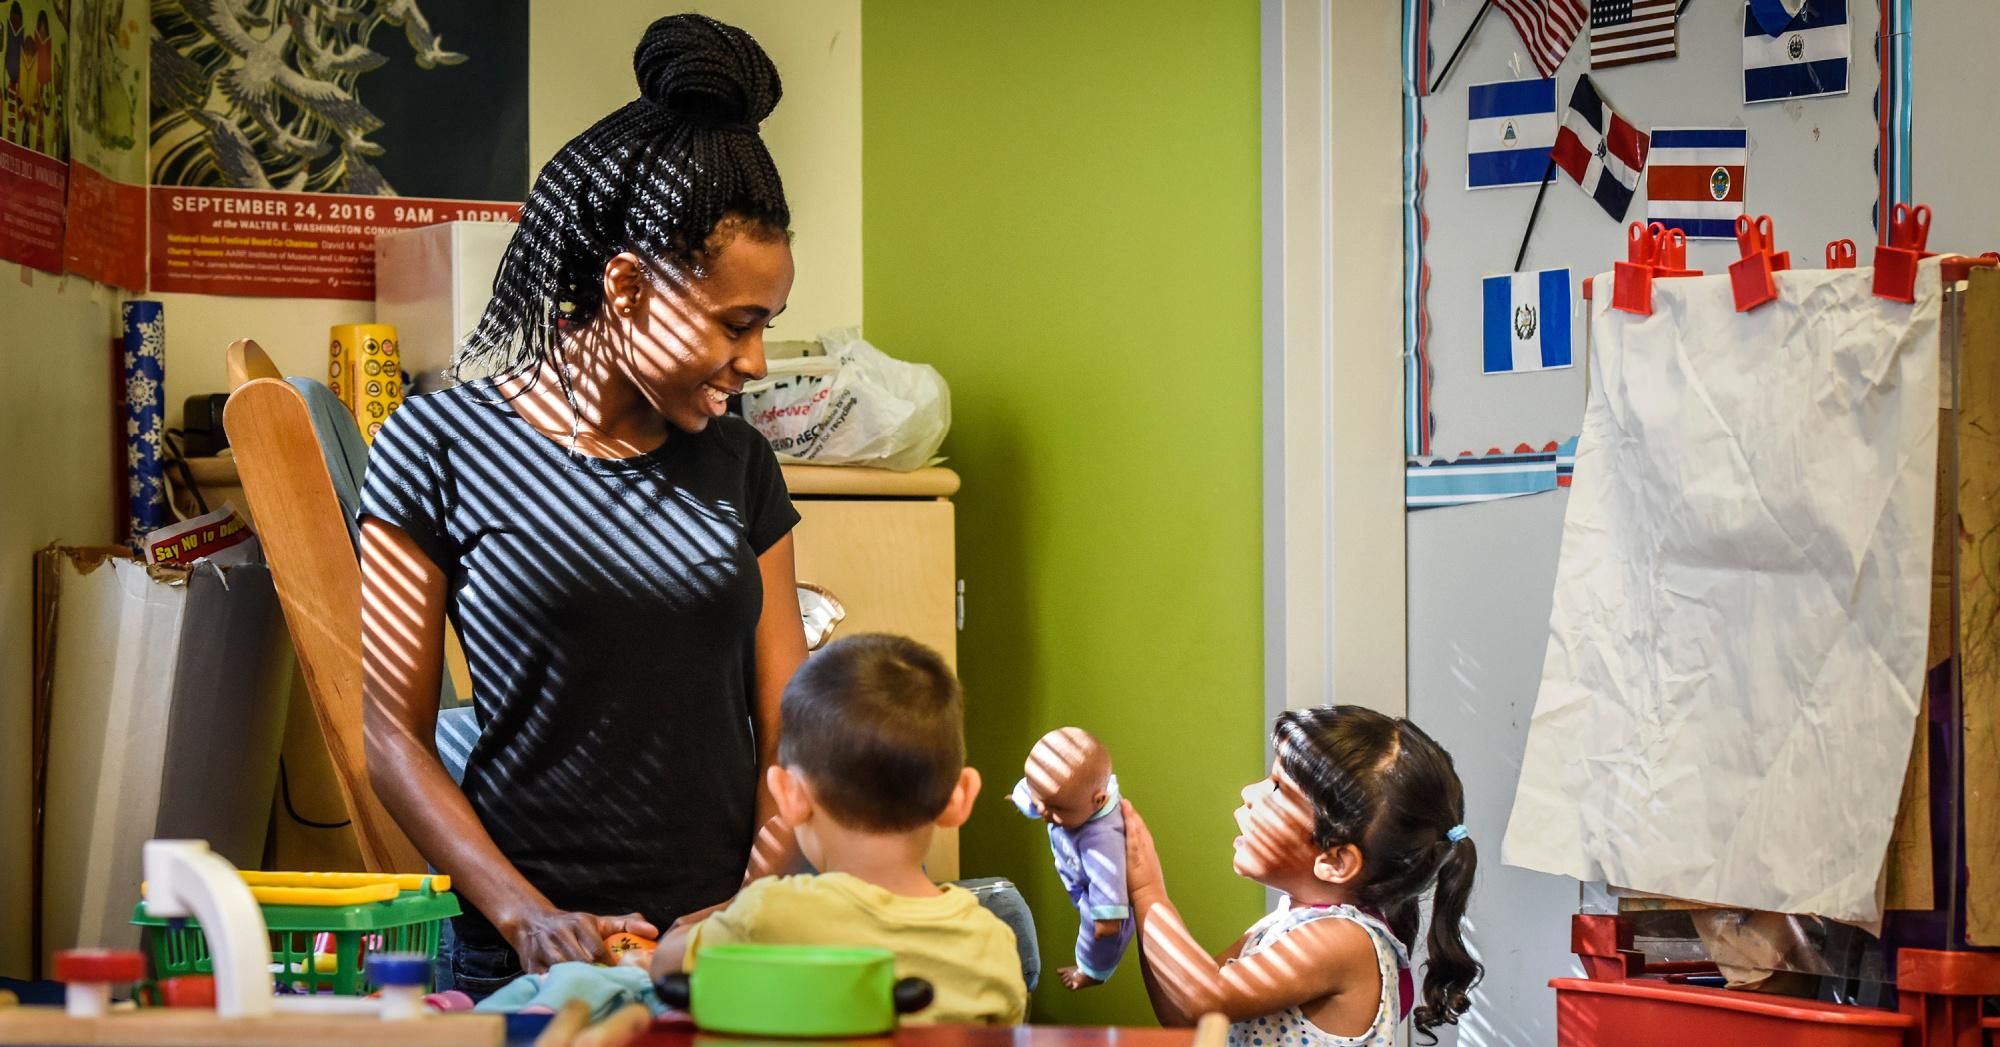 Tyonna Stinnie working toward her certification at SED Child Development Center training for potential child care workers on August 3, 2017 in Washington, D.C. (Photo: Bill O'Leary/The Washington Post via Getty Images)